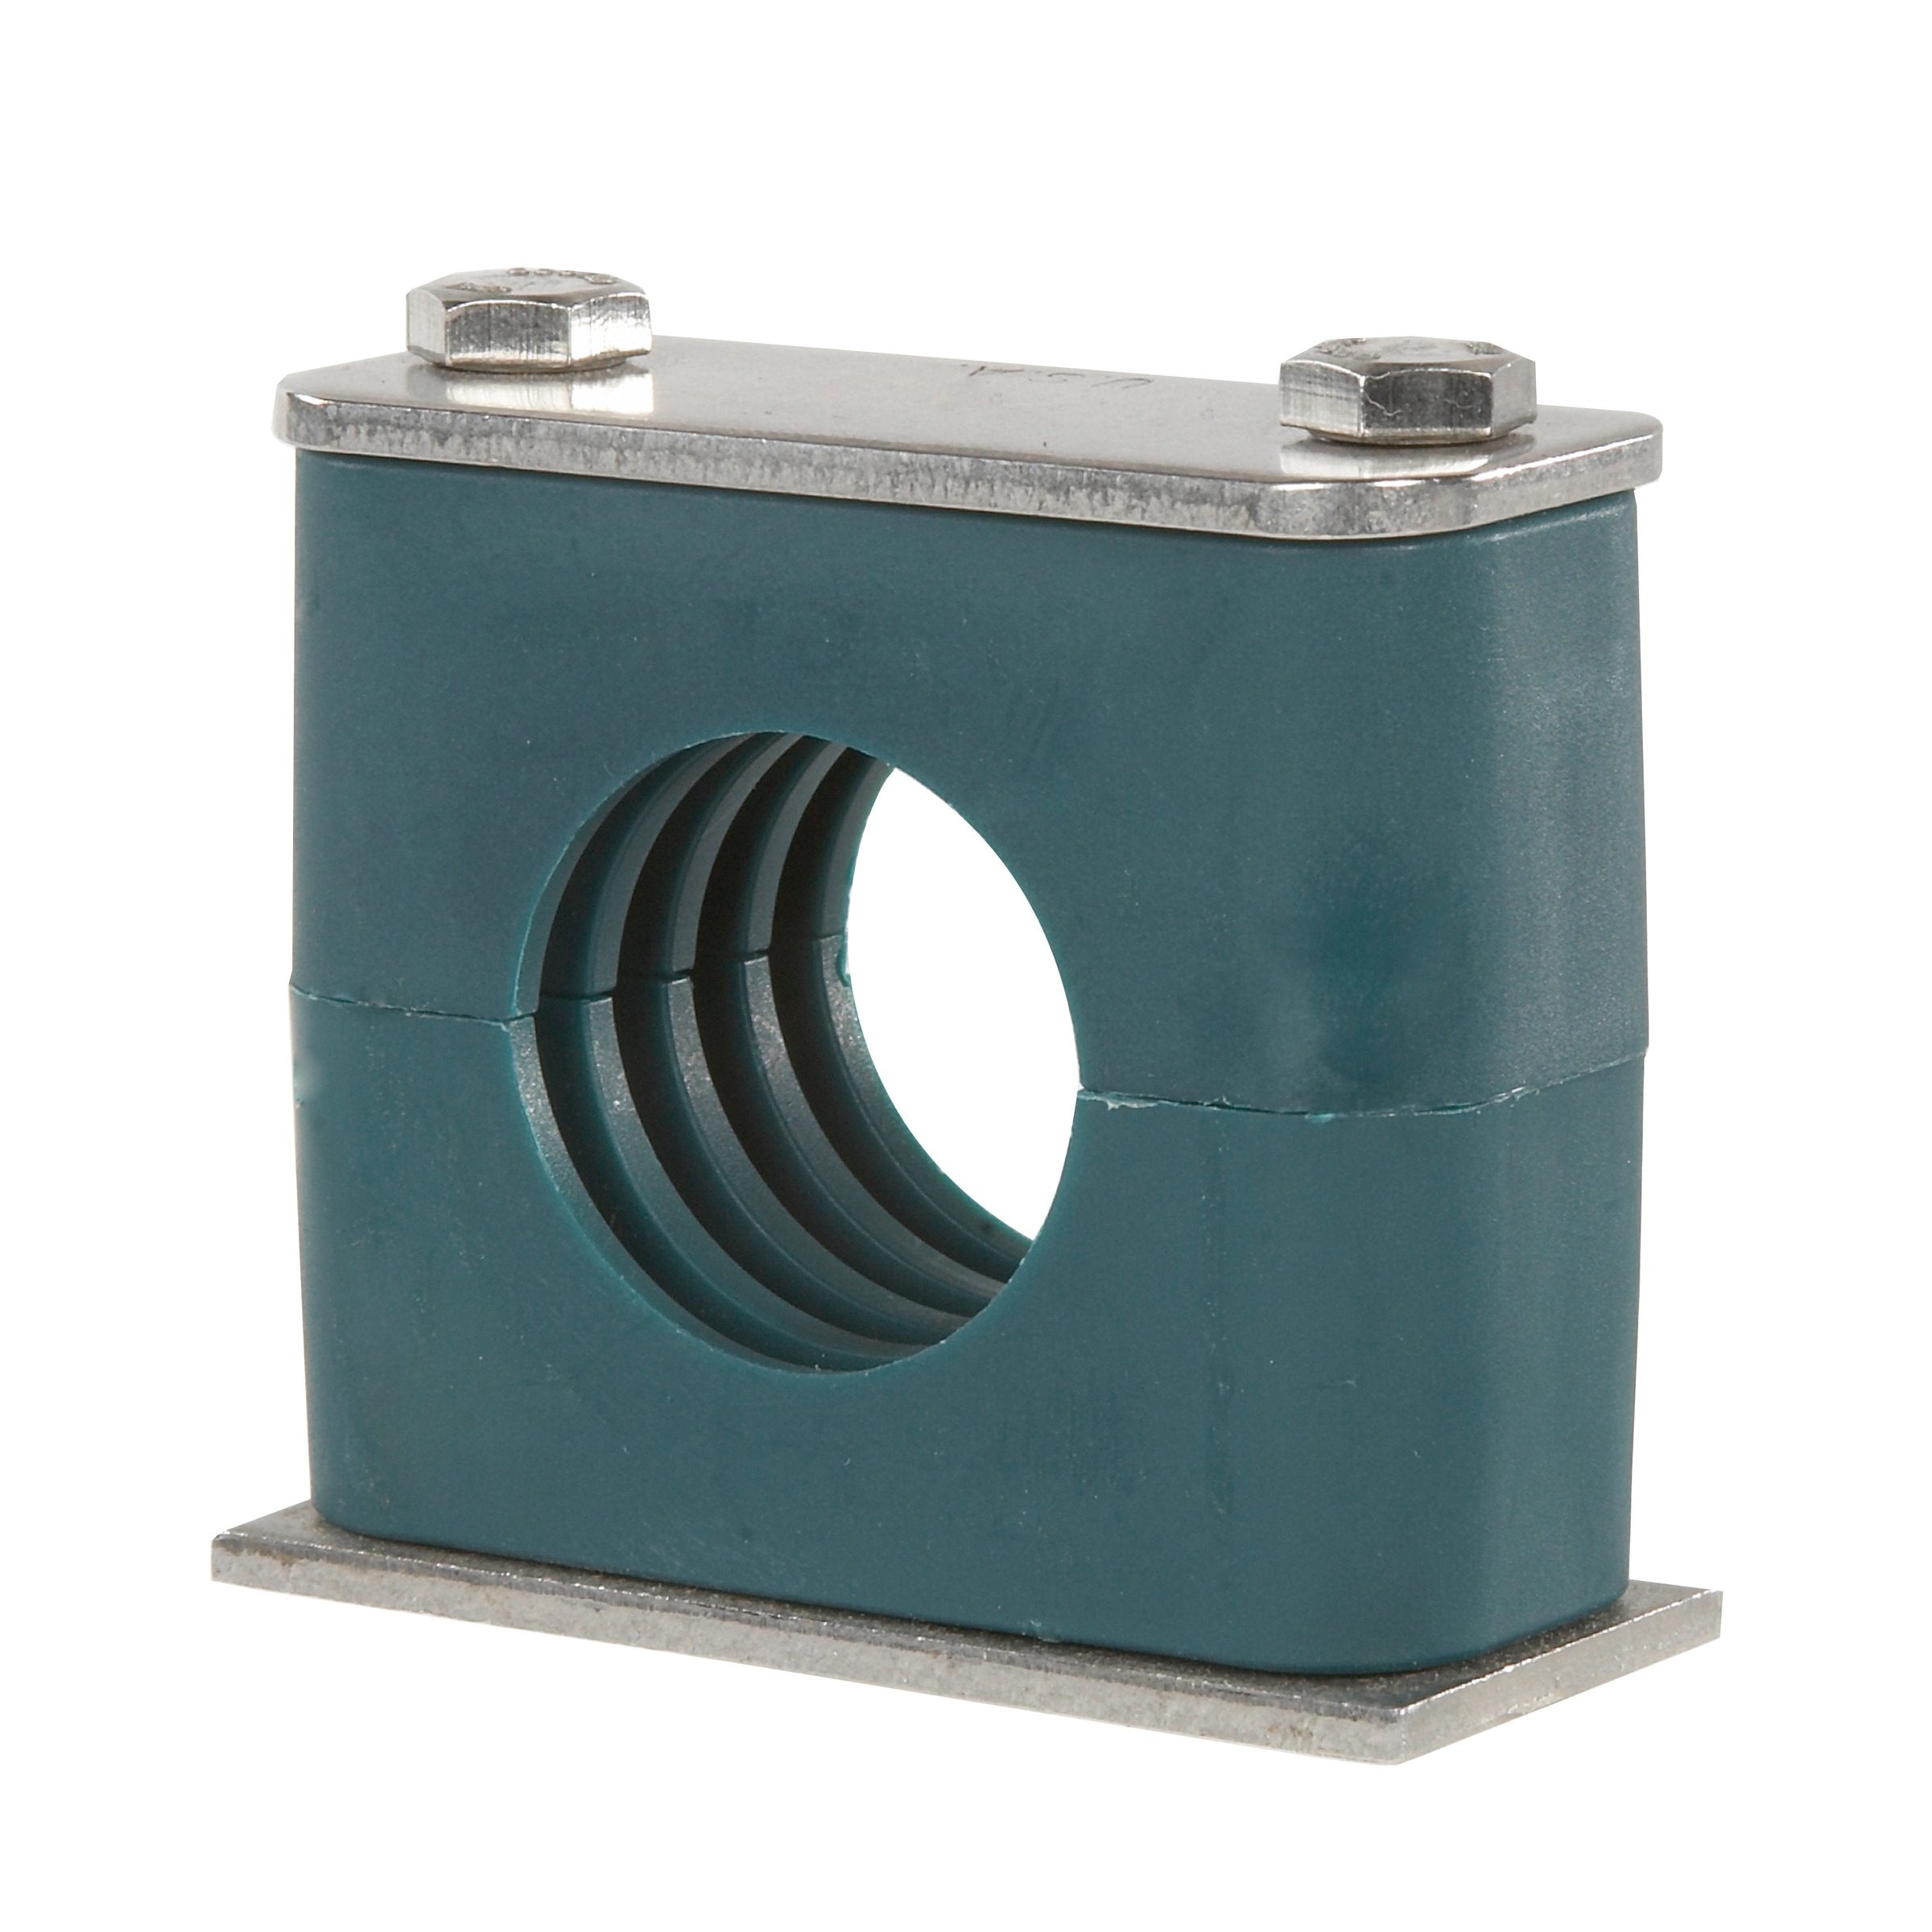 SP-773-PP-DP-AS-U-W5 : Stauff Clamp, Single Weld Plate, 2.874" (73mm) OD, for 2.5" Pipe, Green PP Insert, Profiled Interior, 316SS